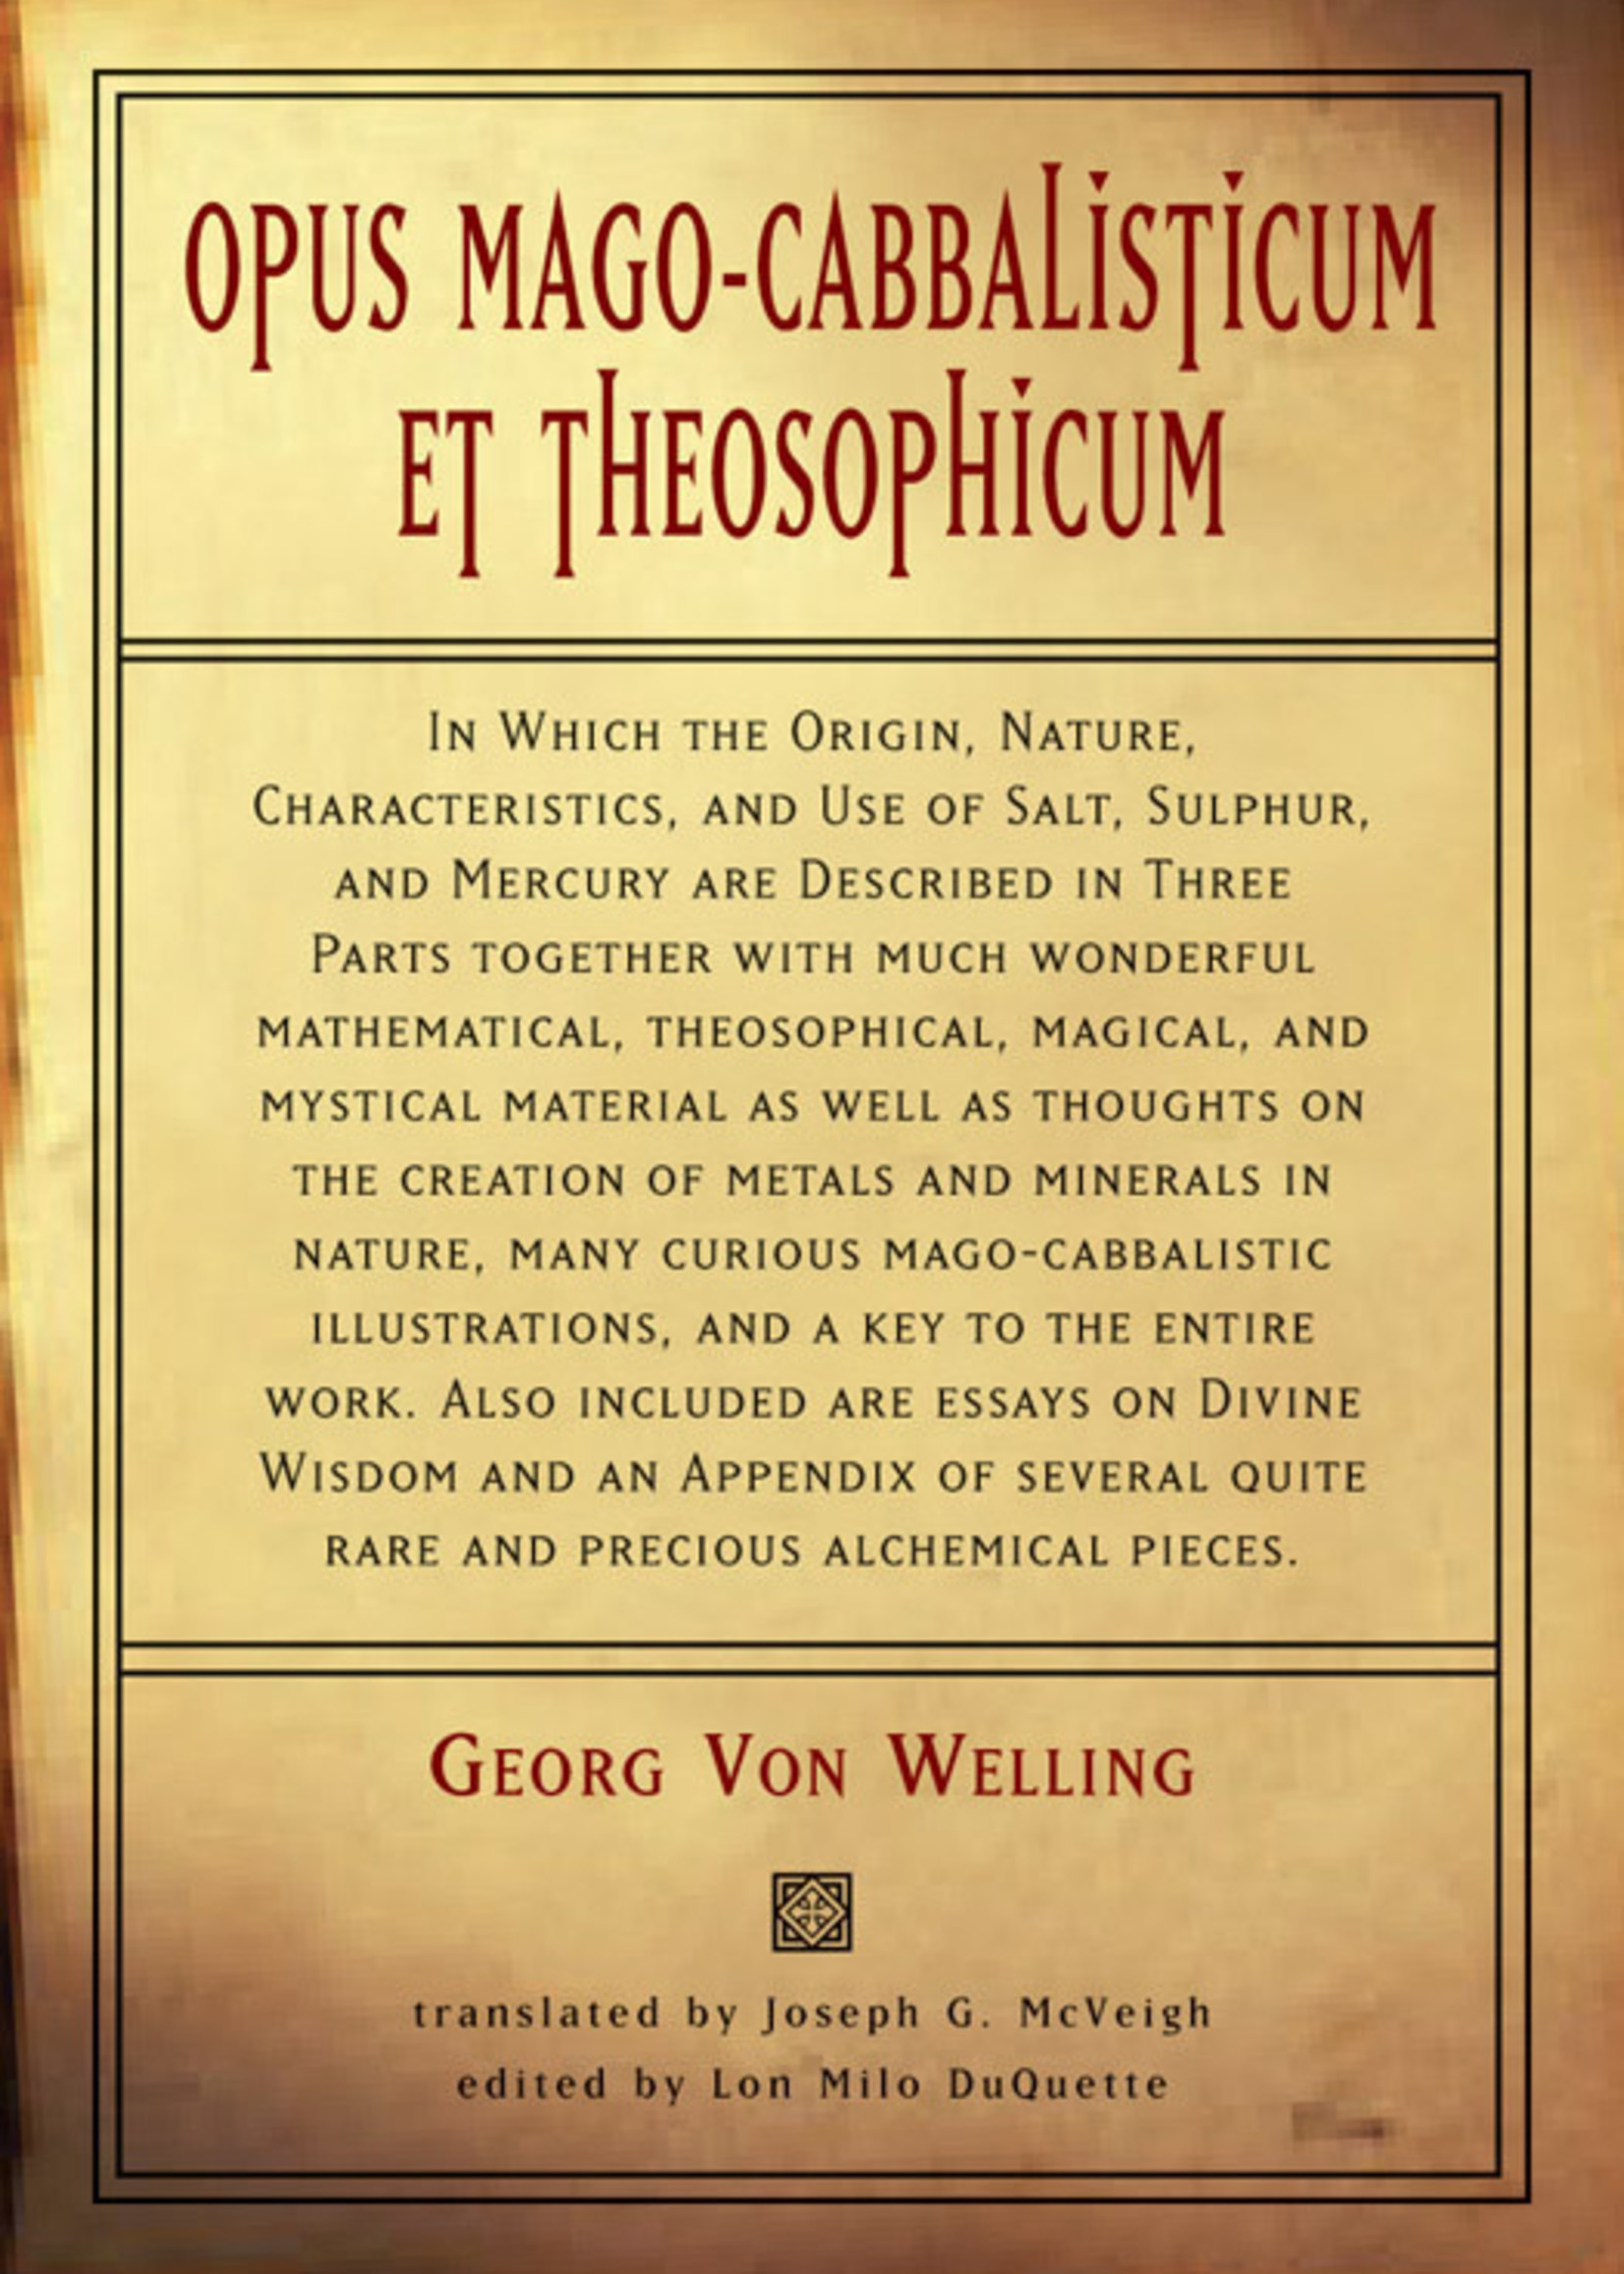 Opus Mago-Cabbalisticum et Theosophicum In Which the Origin, Nature, characteristics, and Use of Salt, Sulpher, and Mercury are Described in Three Parts - Georg von Welling, Translated by Joseph G. McVeigh, Edited by Lon Milo DuQuette